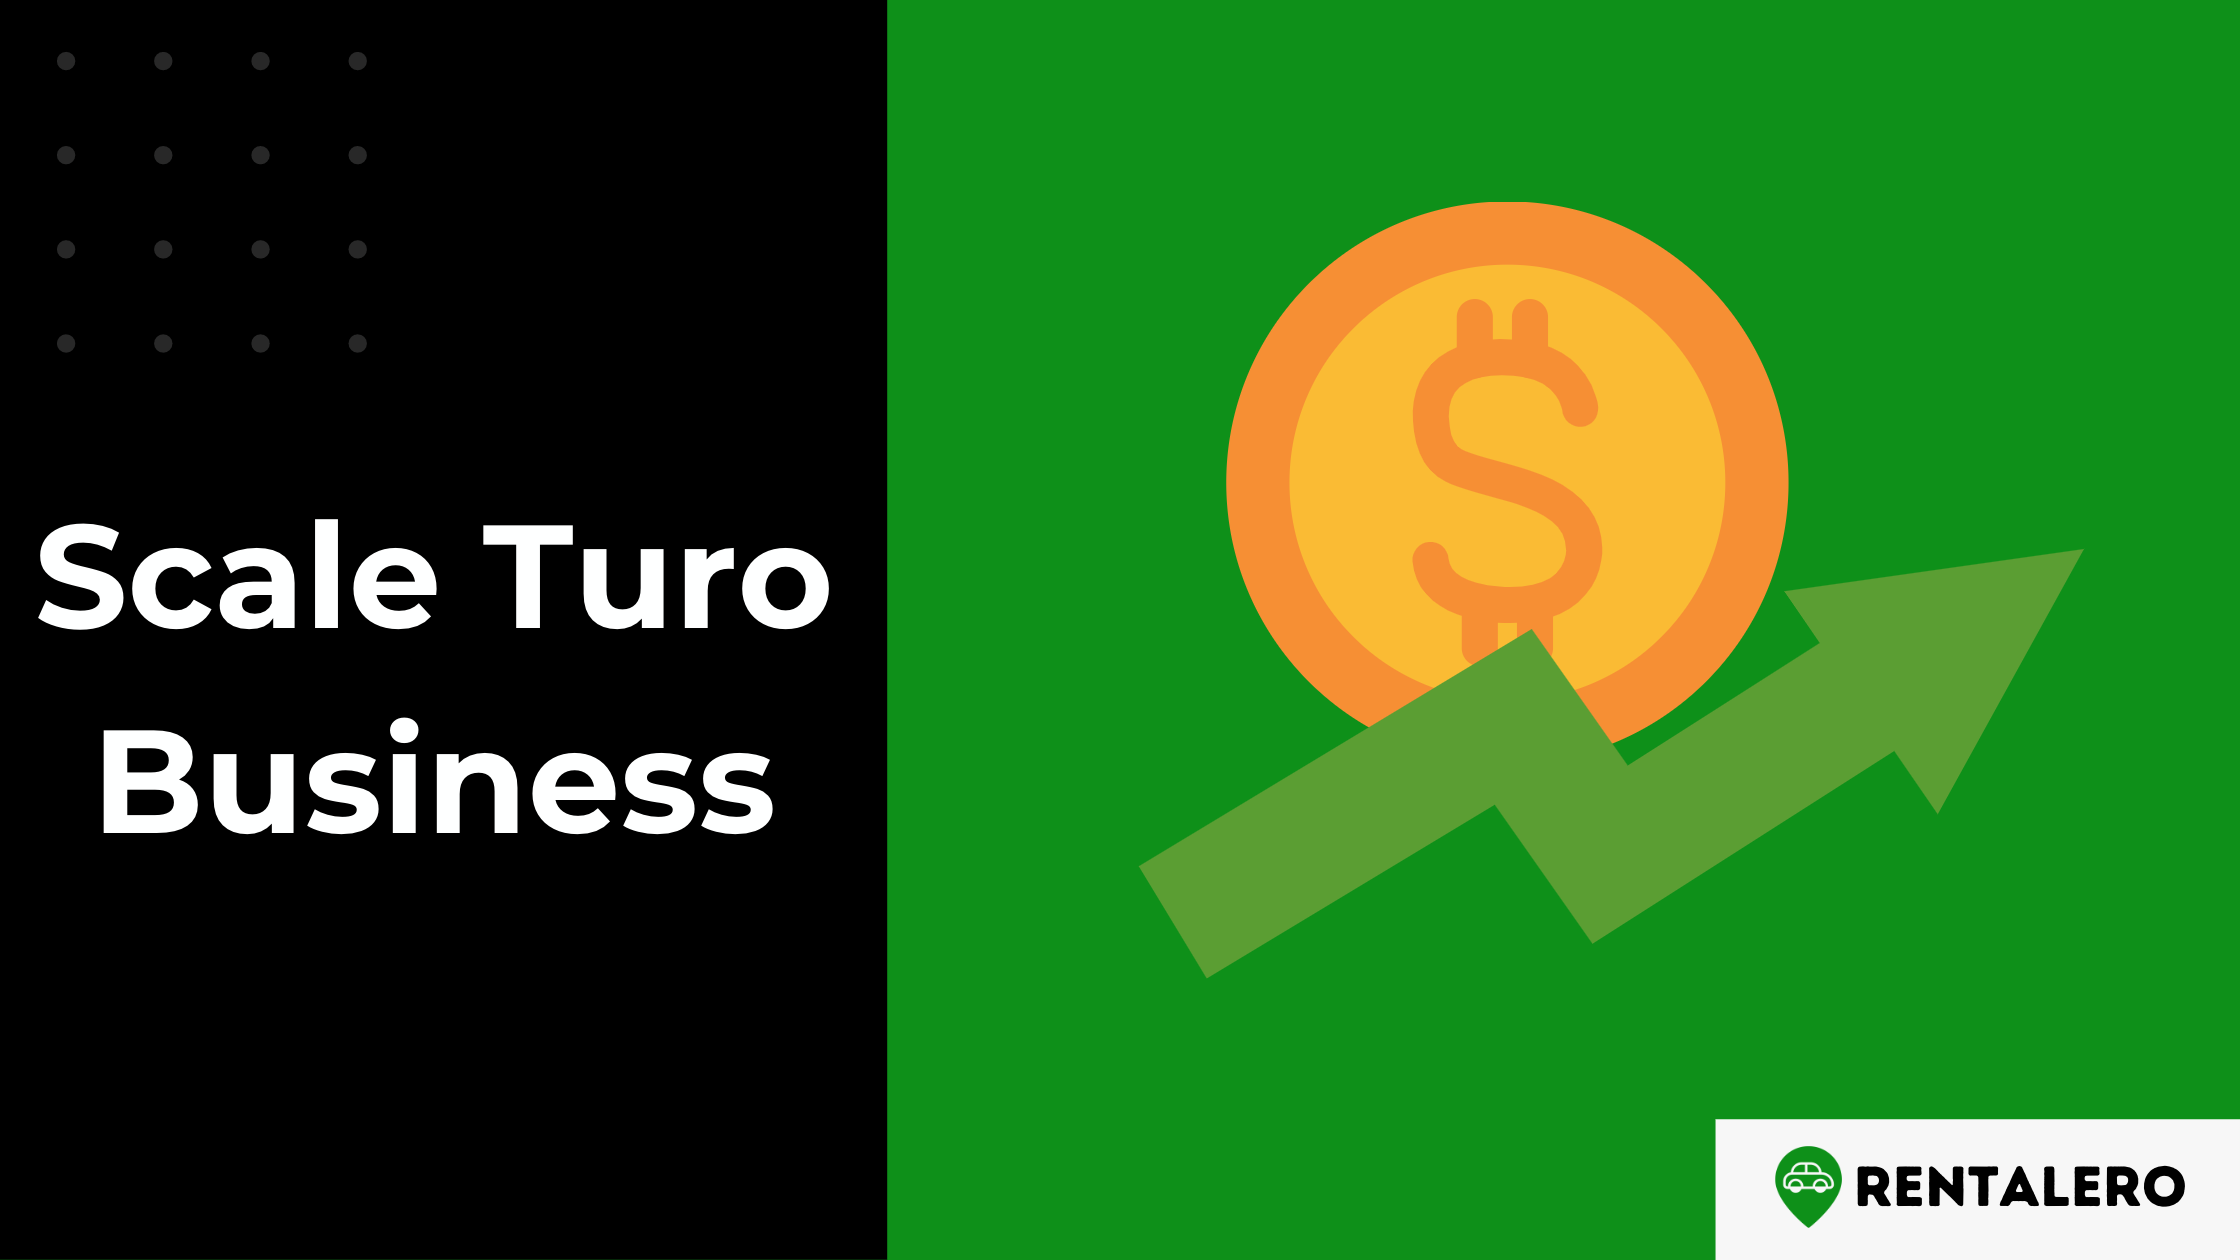 How to Scale Turo Business: 5 Proven Steps to Success